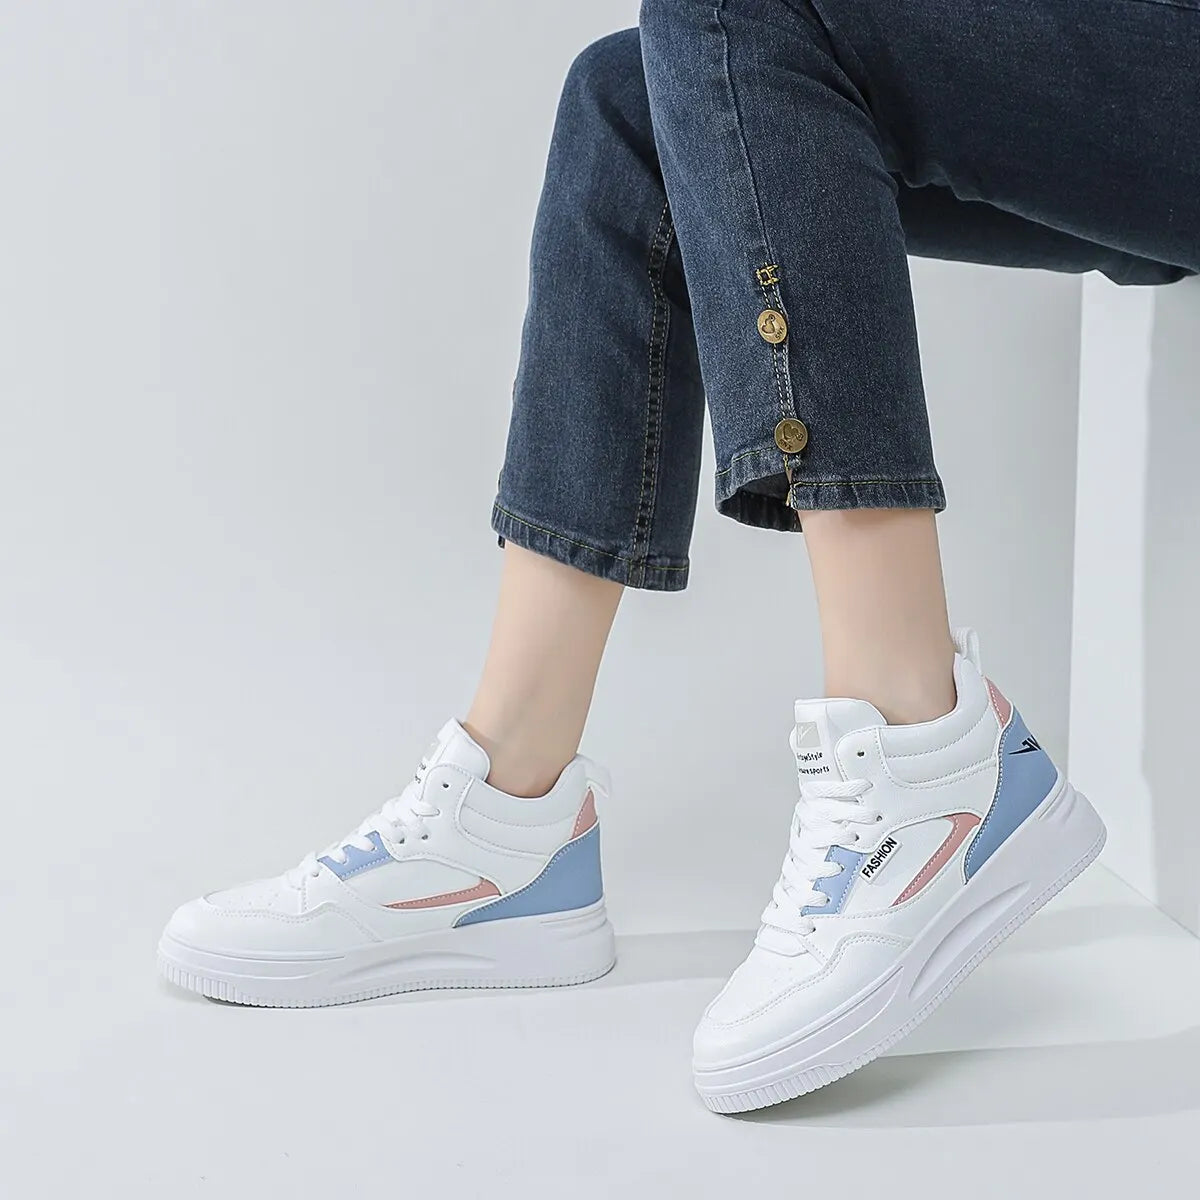 Women's Lace-Up High-top Sneakers Lightweight Sneakers